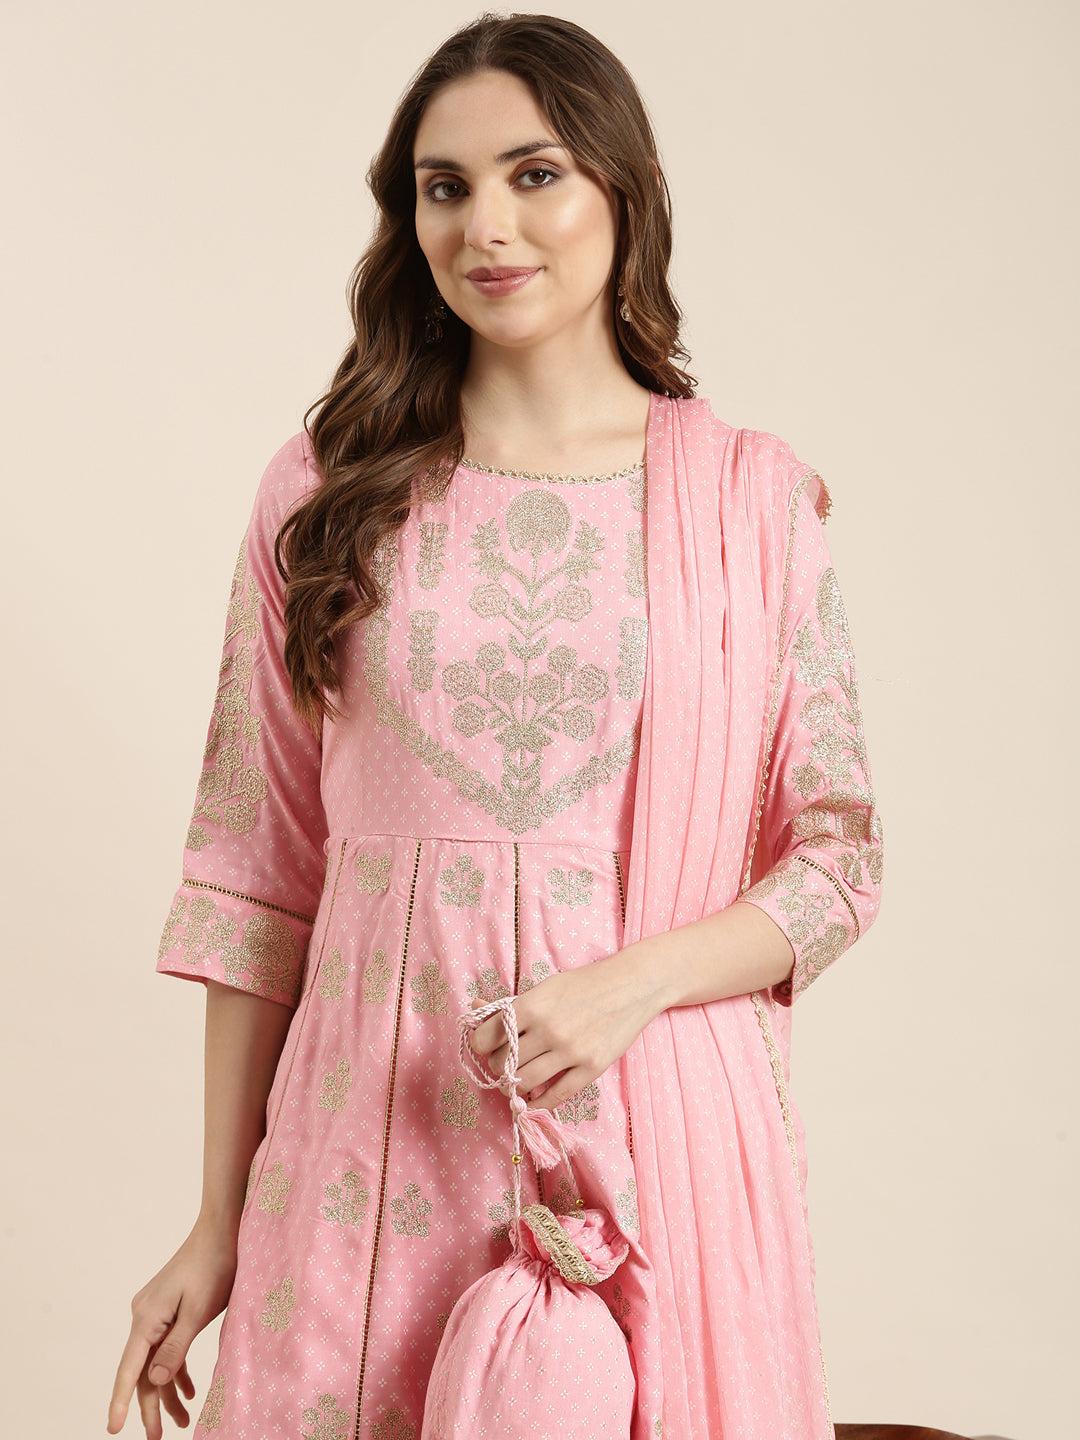 Women Anarkali Pink Floral Kurta and Trousers Set Comes With Dupatta and Potli Bag